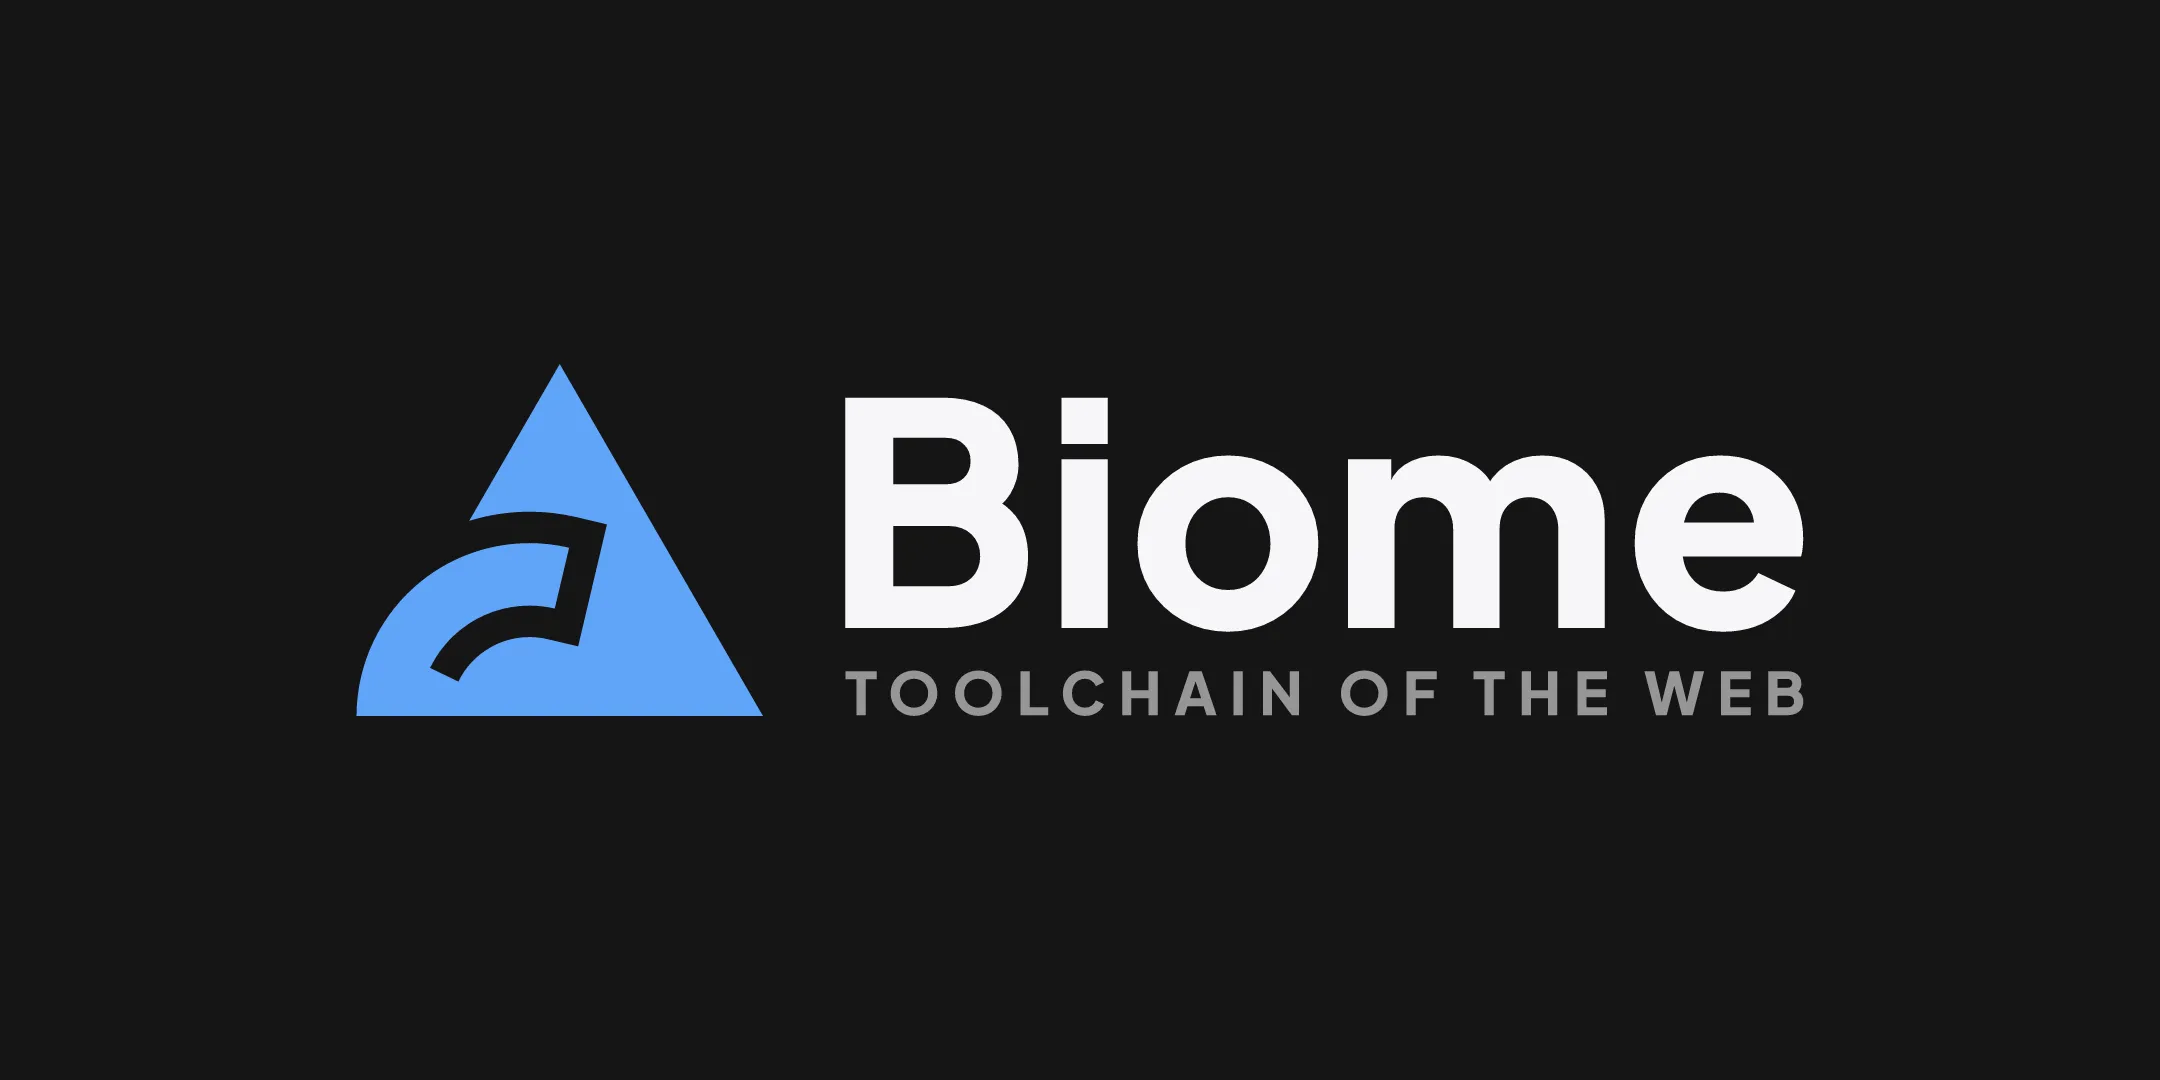 The name of the project - "Biome", with the slogan underneath that says "Toolchain of the web"